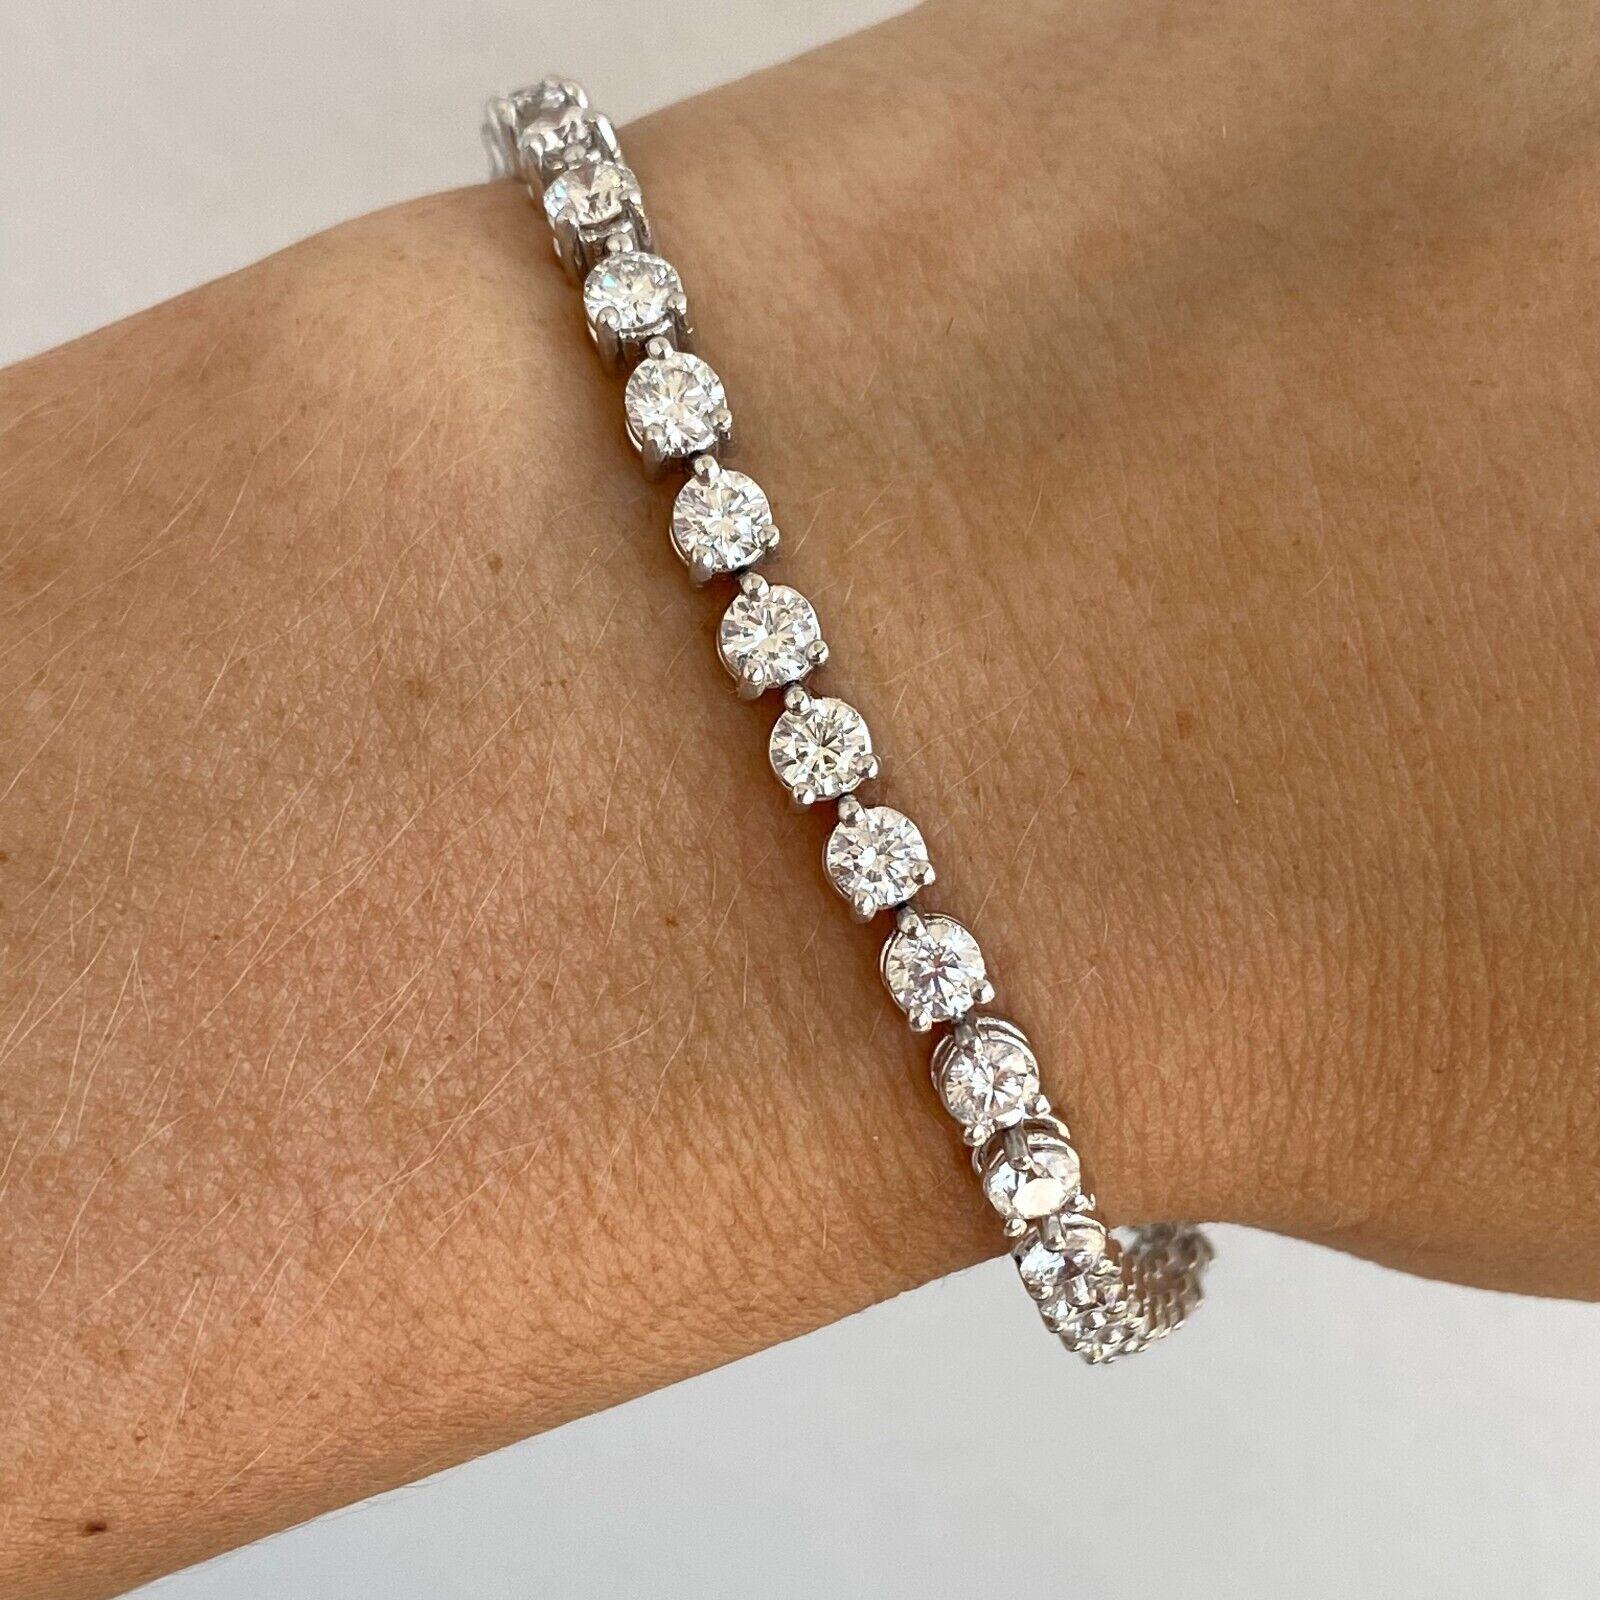 DIAMOND TENNIS BRACELET 
Specifications:
    main stone:ROUND DIAMONDS
    carat total weight: APPROXIMATELY 7.70CTW
    color:F-G
    clarity:SI1
    metal:14K WHITE gold
    type:BRACELET
    weight:11.9 gr
    LENGHT:7 INCH
    hallmark:585

